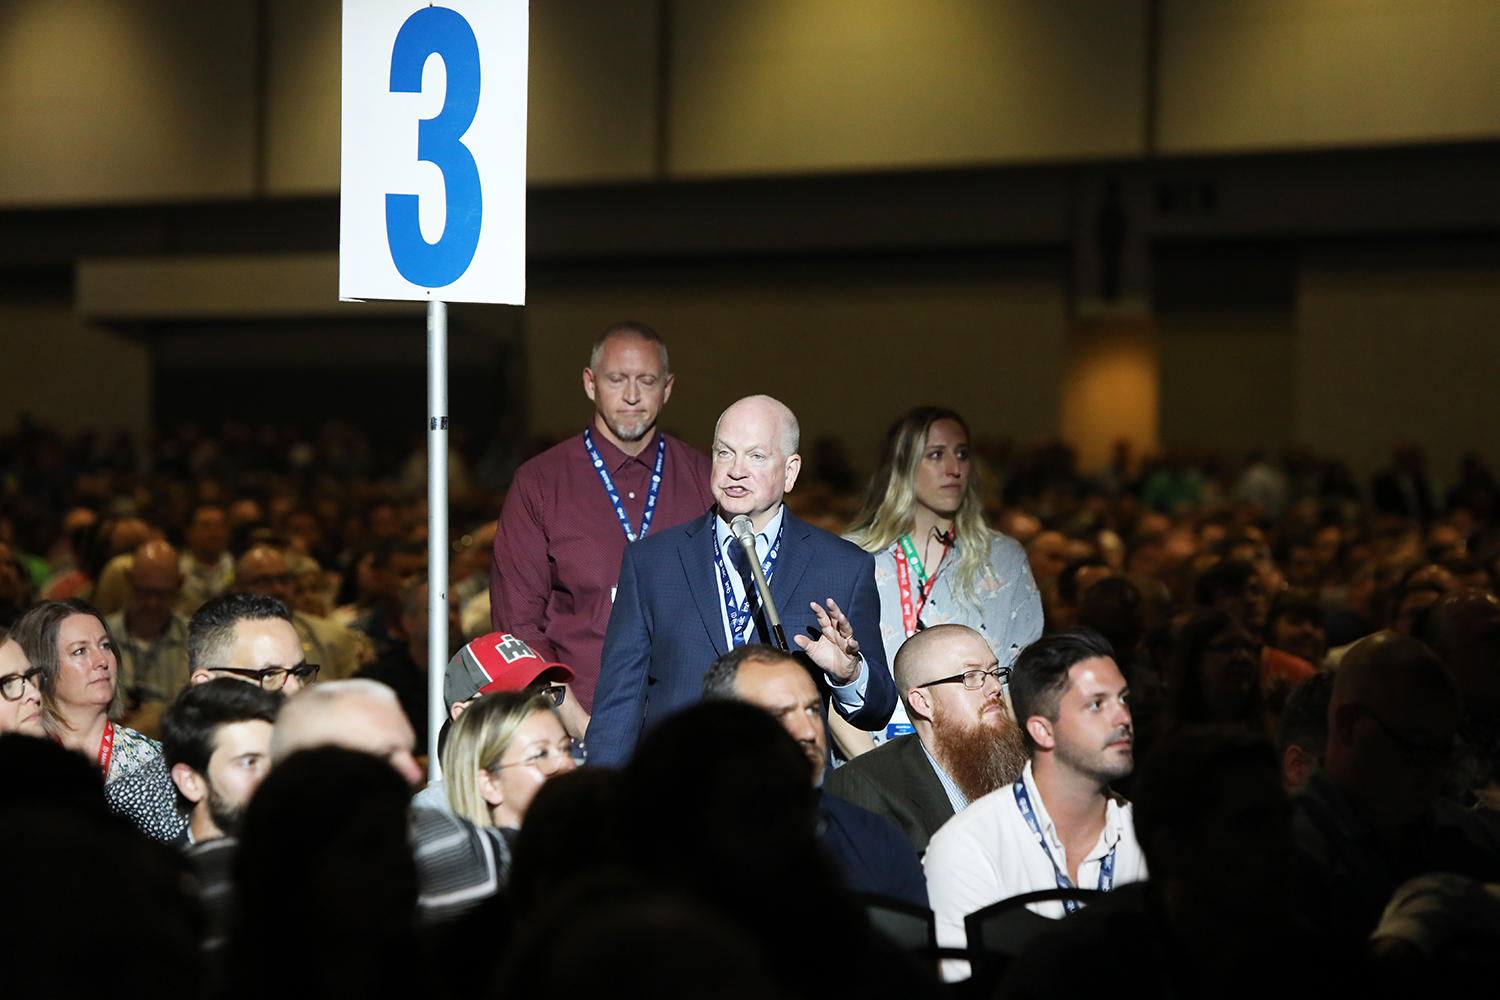 Danny Akin waits near a mic during the SBC annual meeting at the Music City Center in Nashville, Tuesday, June 15, 2021. RNS Photo by Kit Doyle